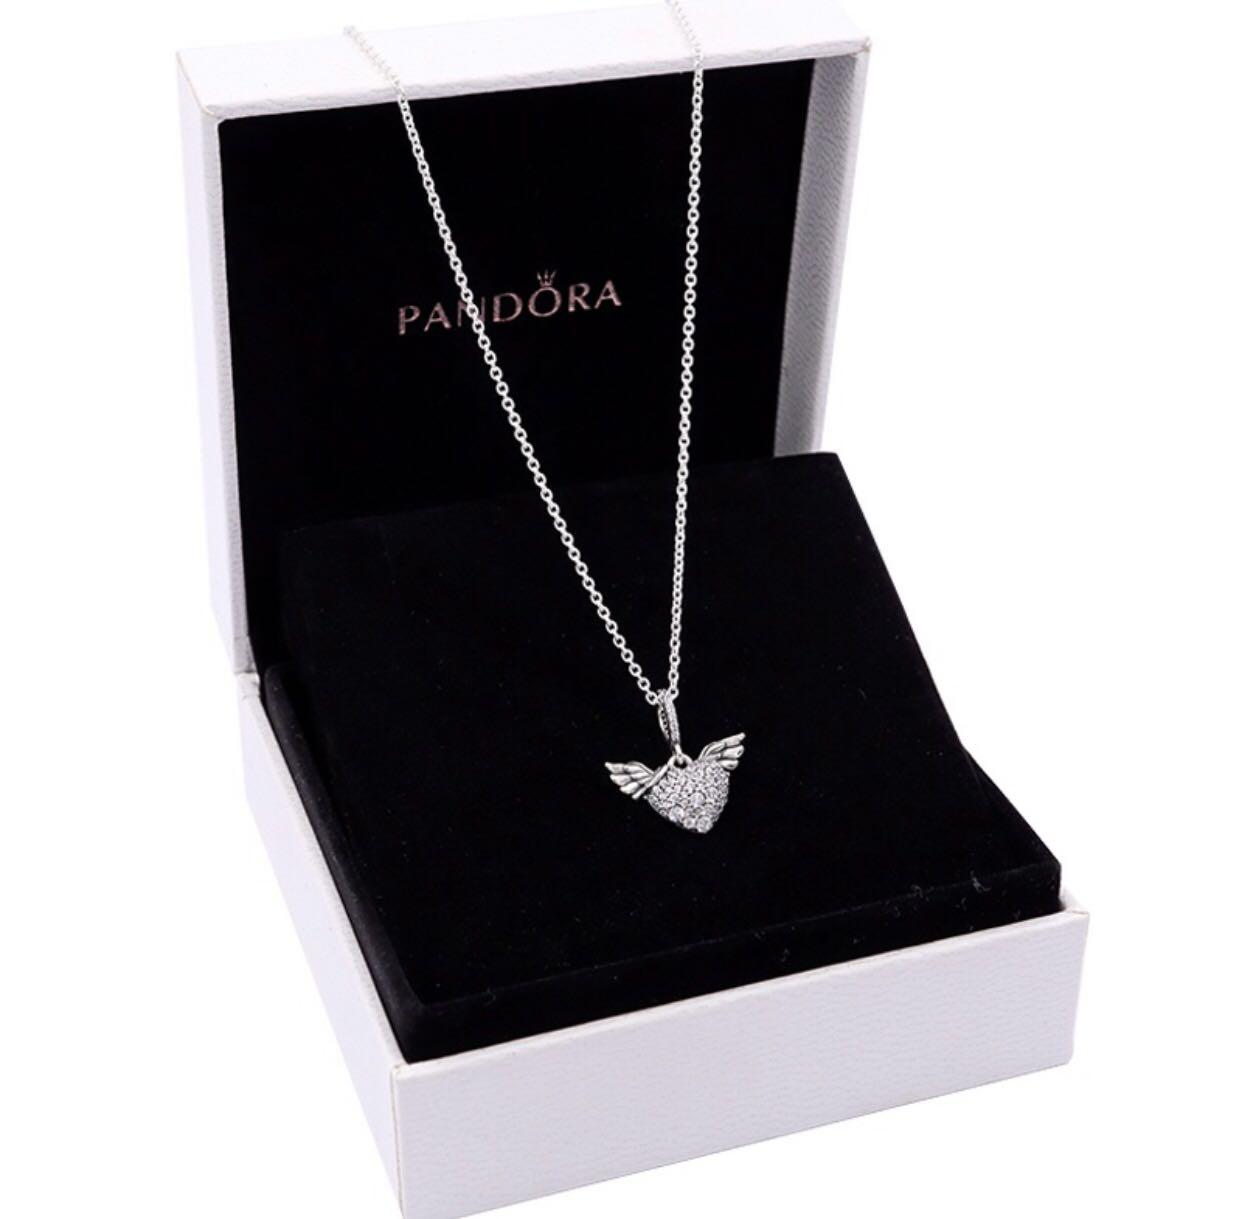 Stunning PANDORA Heart Necklace with Angel Wings